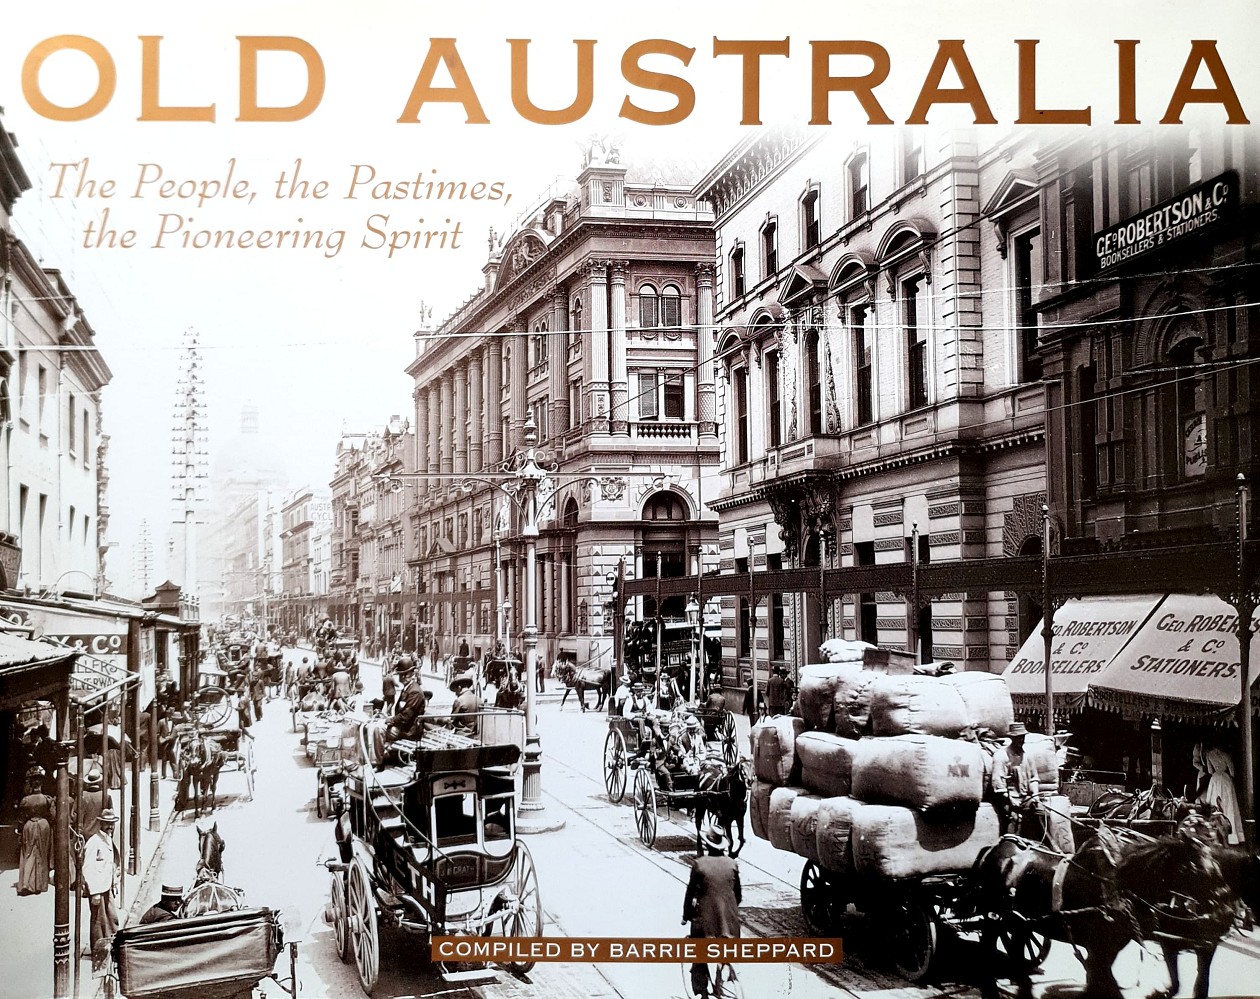 Old Australia: The People, The Pastimes, The Pioneering Spirit - Sheppard Barrie - Marlowes - Australia